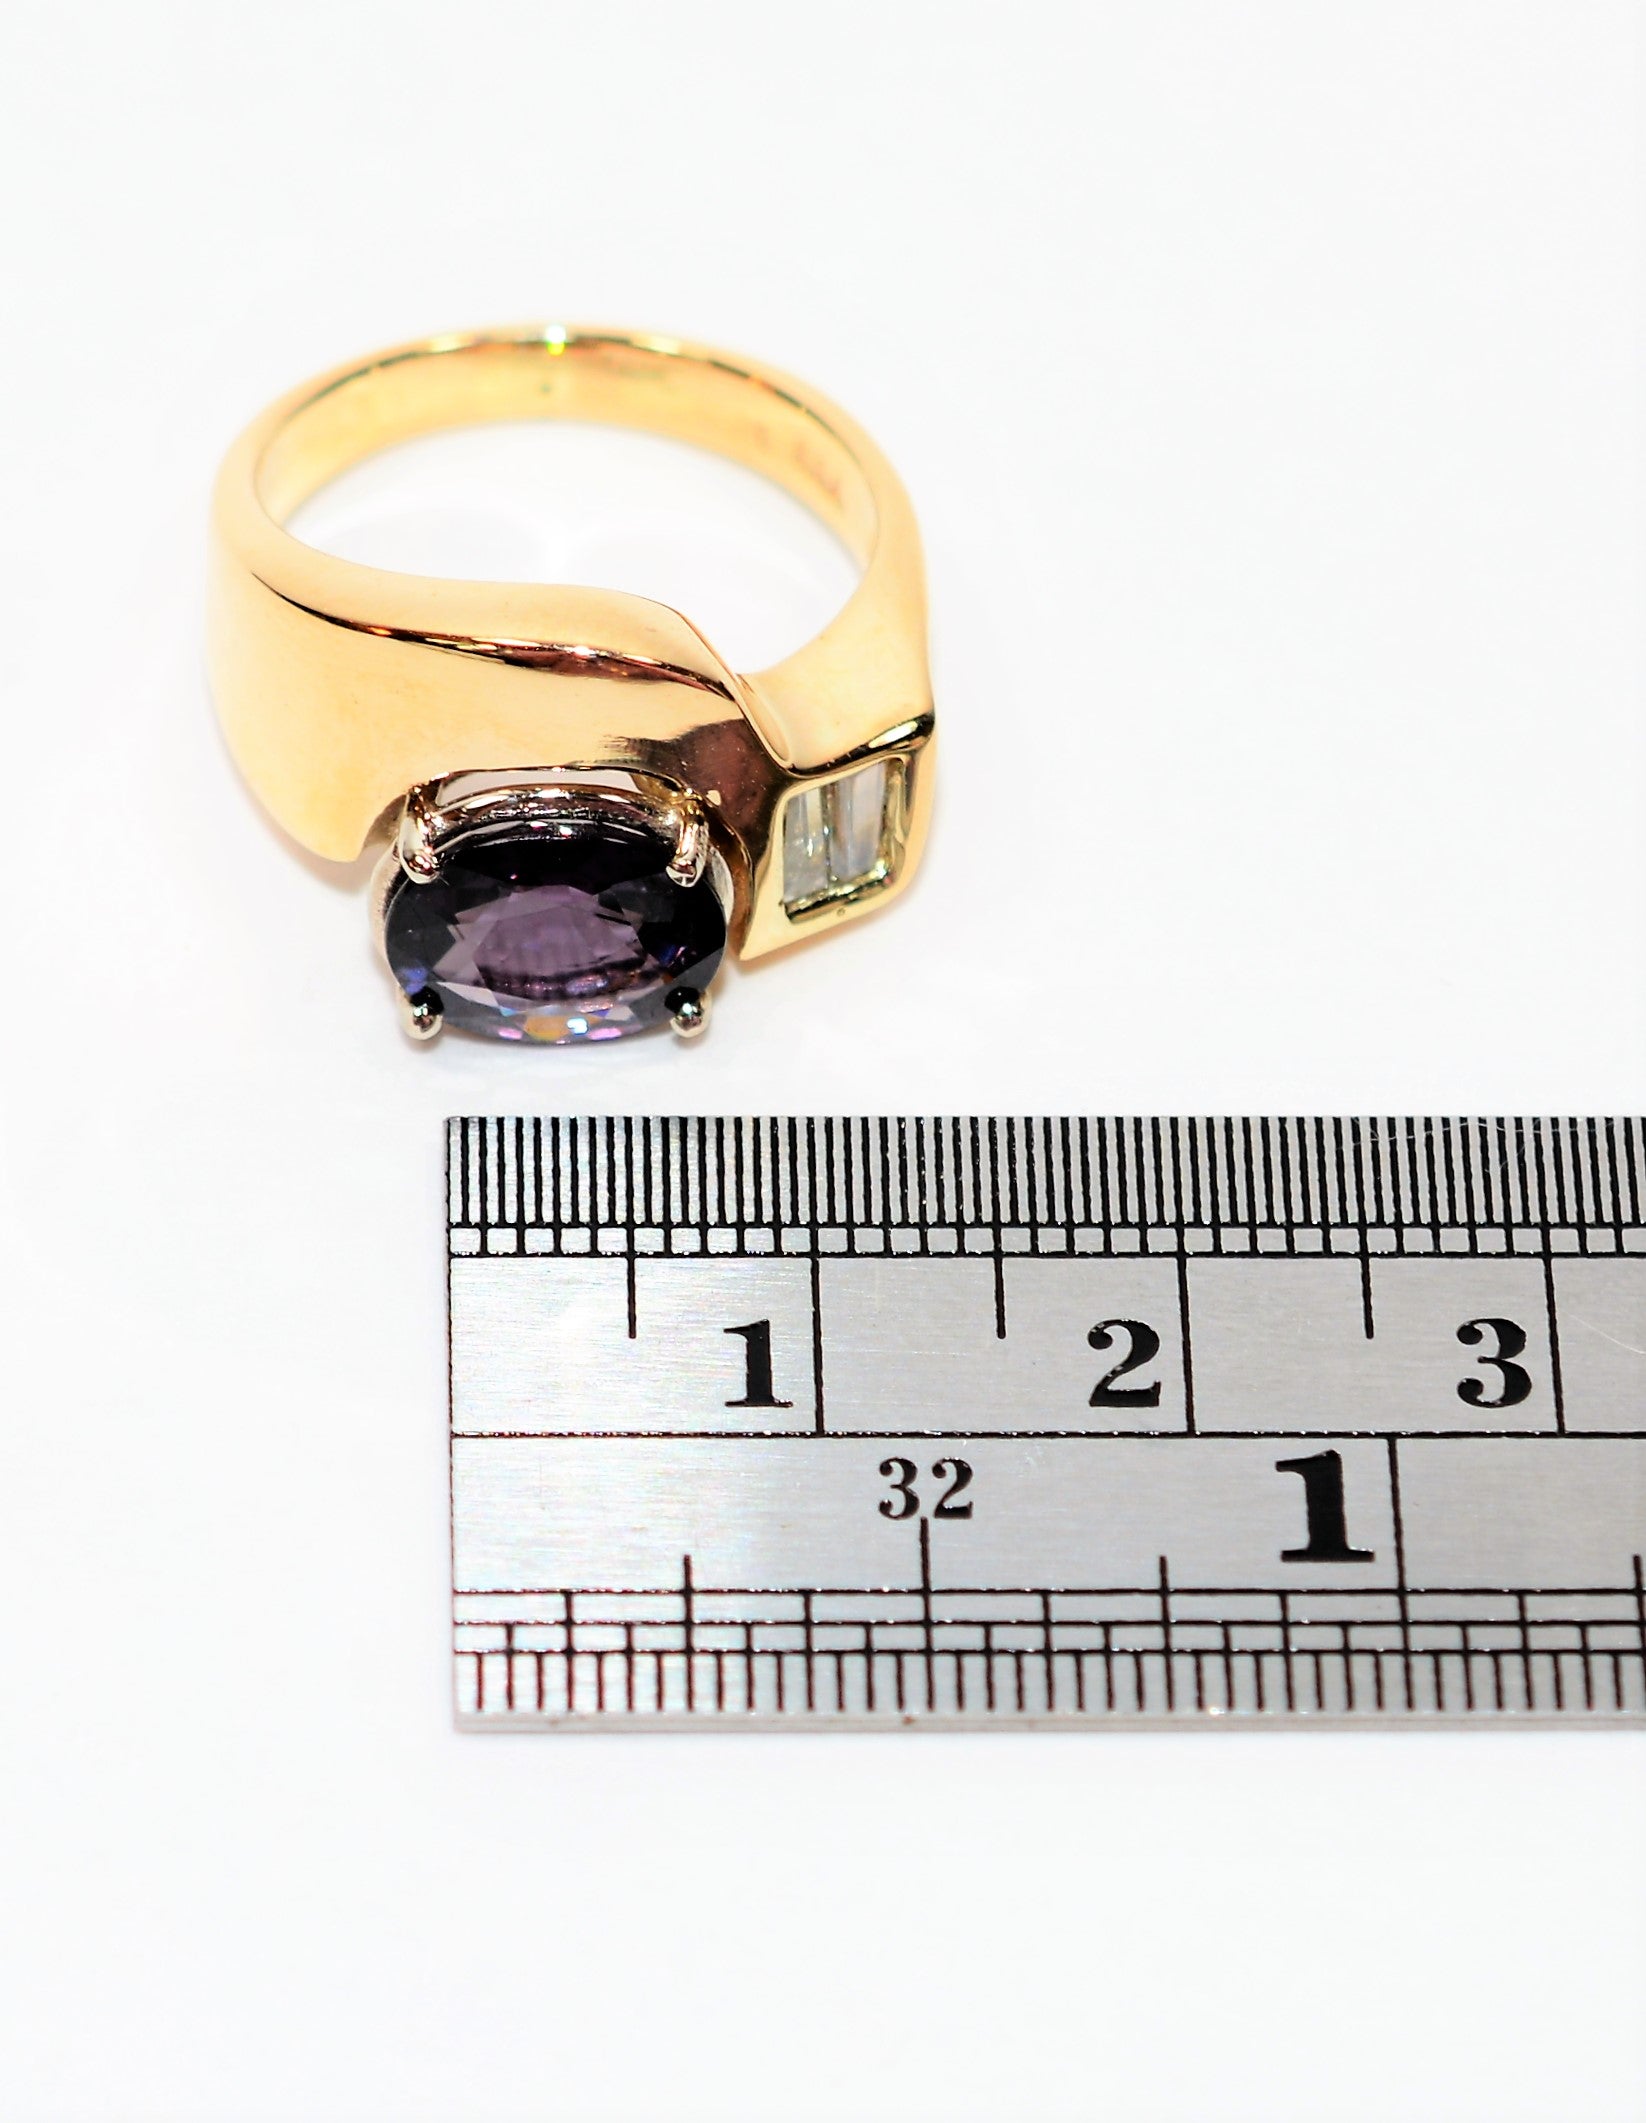 Natural Spinel & Diamond Ring 14K Solid Gold 2.85tcw Cocktail Ring Gemstone Ring June Birthstone Ring Statement Ring Women's Ring Jewellery